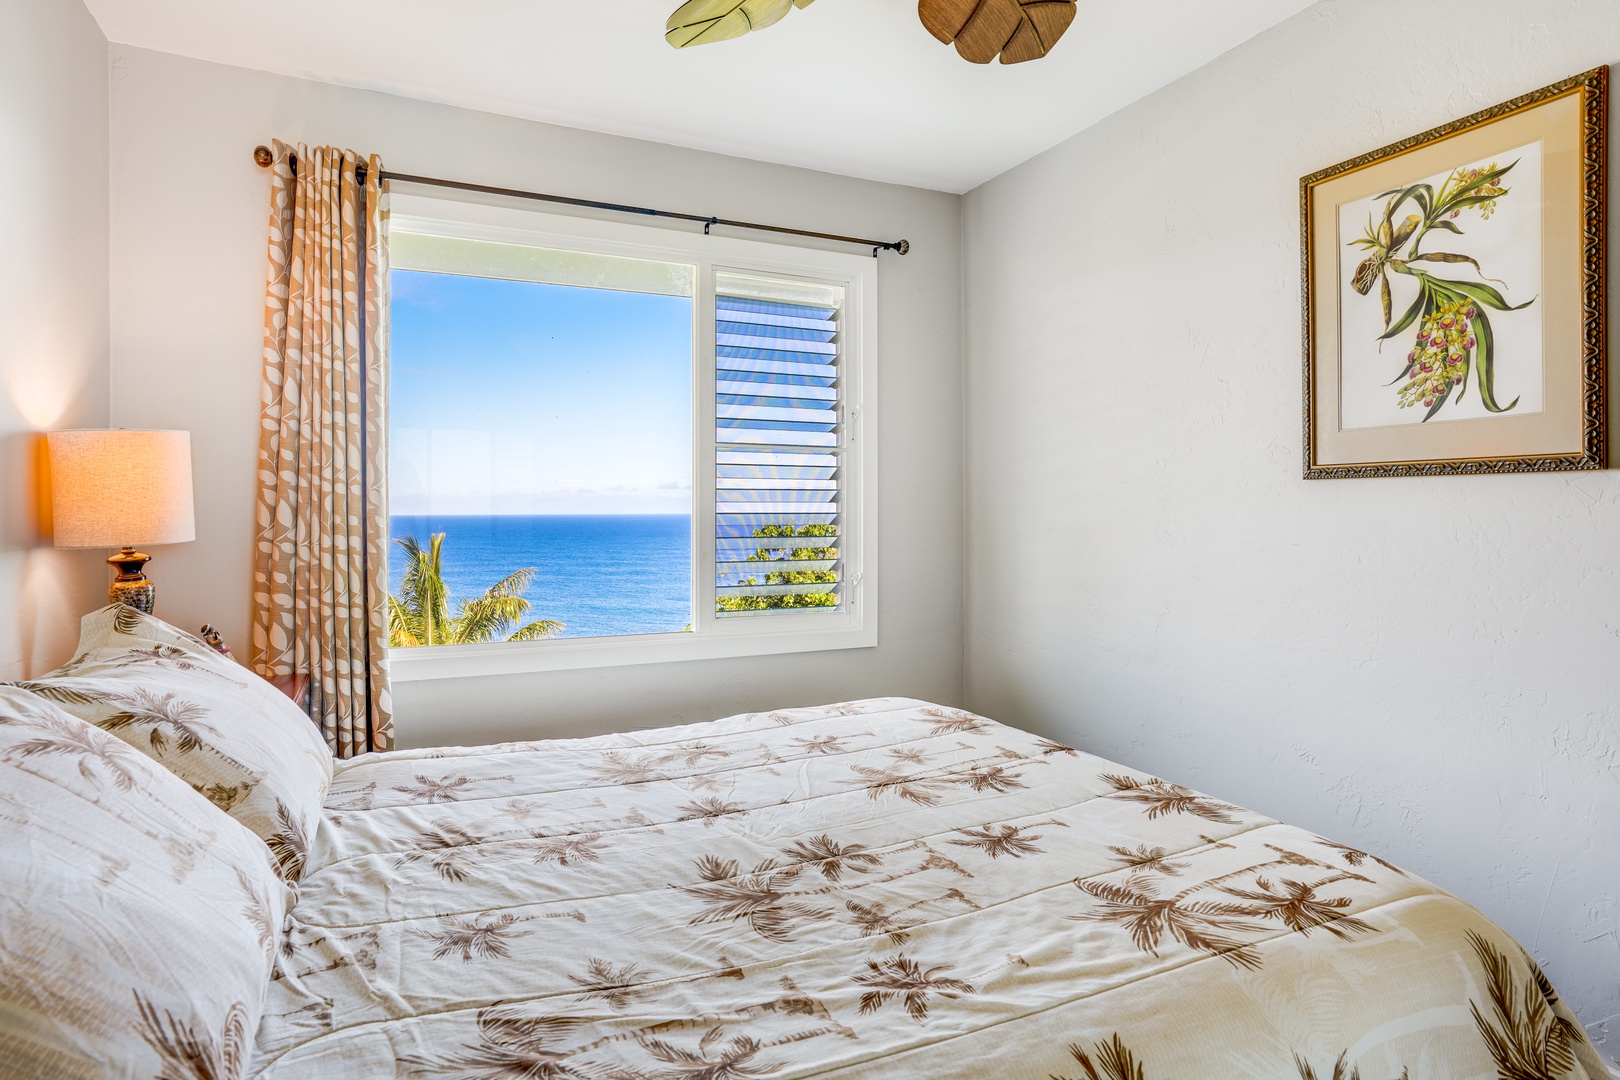 Princeville Vacation Rentals, Alii Kai 7201 - Wake up to the tropical beauty from the guest suite.